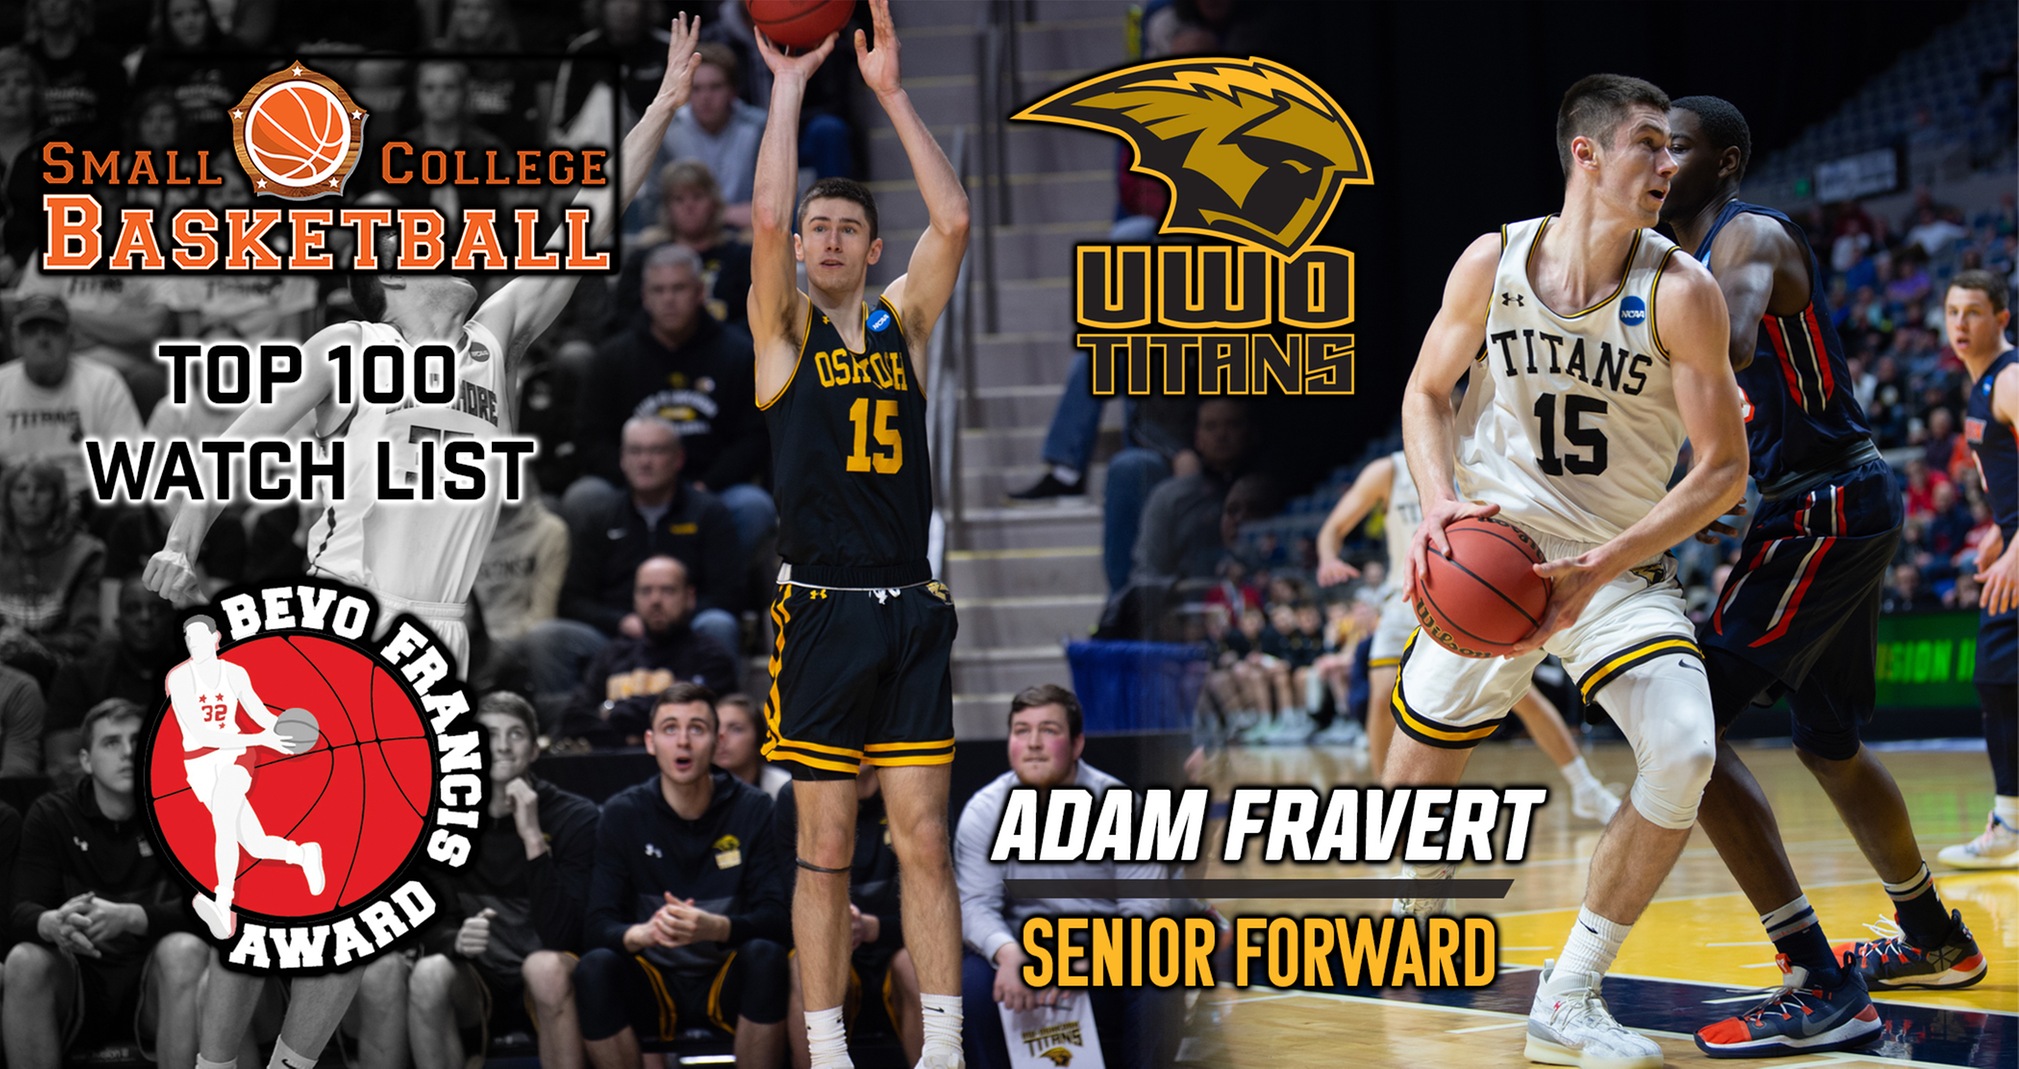 Fravert Selected To Francis Award Top 100 Watch List